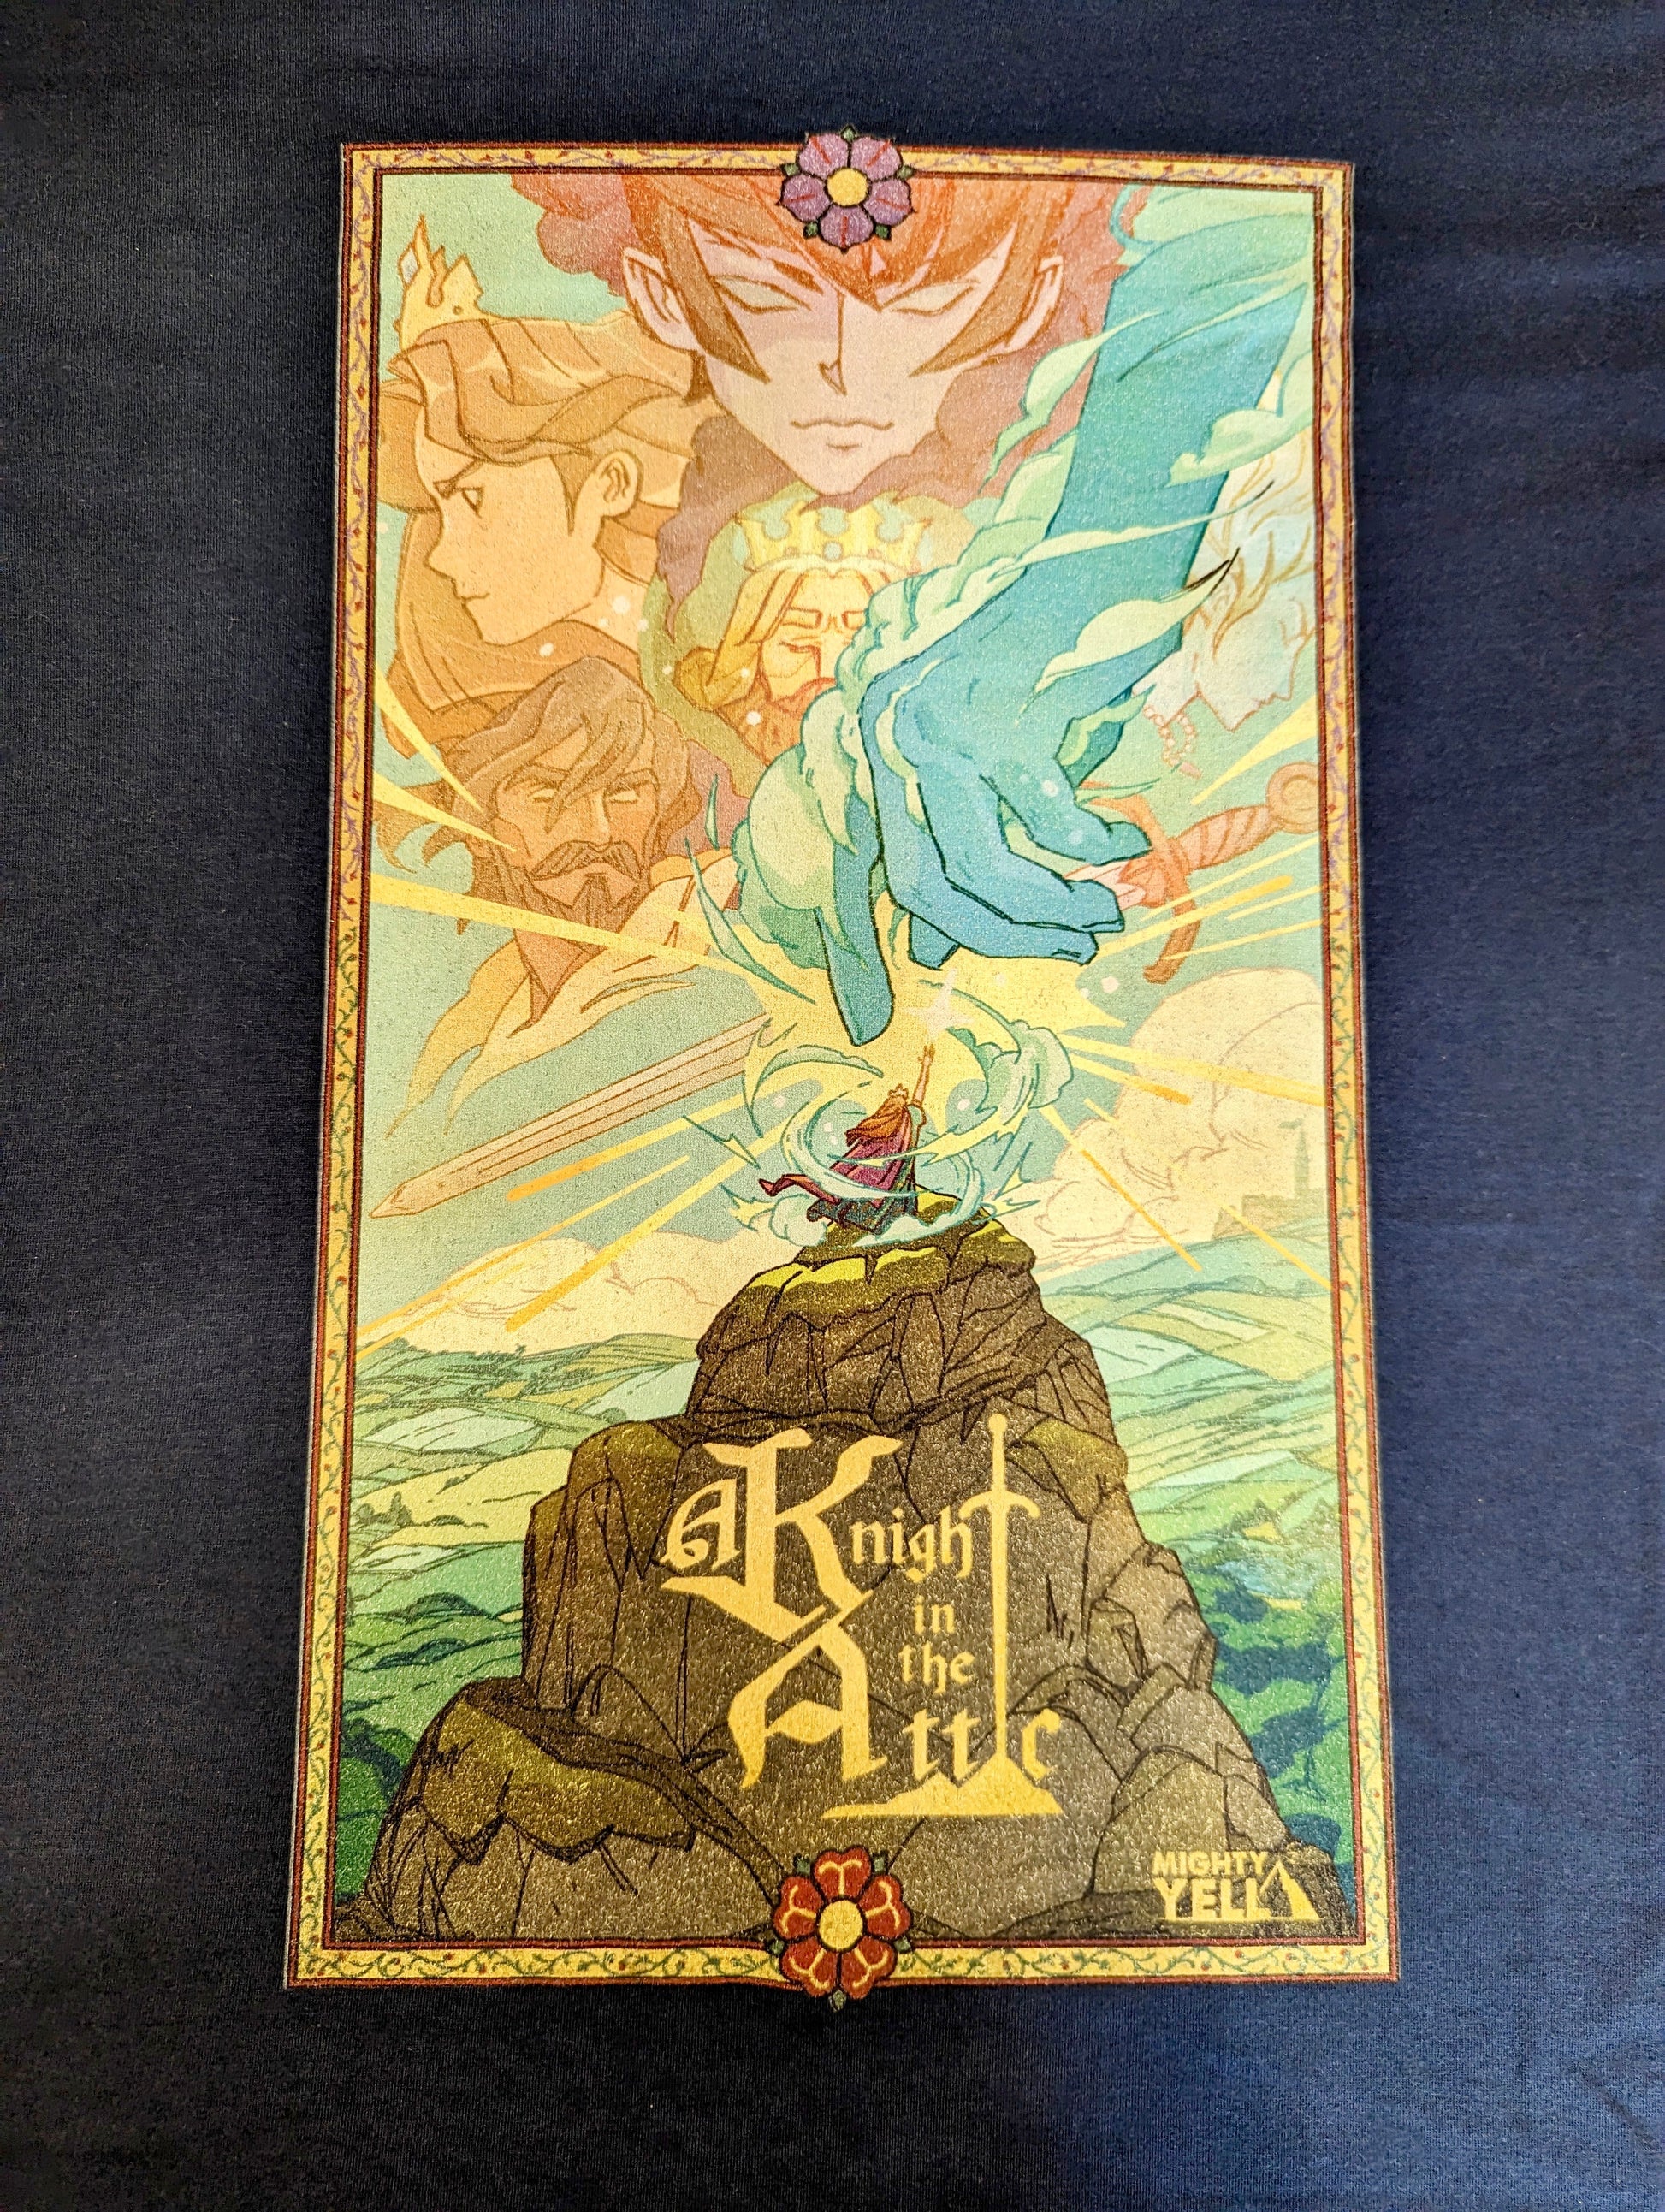 A Navy T-Shirt with Key Art from the game A Knight In The Attic. Featuring Characters faces and a mountain landscape in soft and vibrant blue, yellow, green, brown and peach. A character stands atop a mountain, in front of a large blue hand and a sword. In medieval style font it reads “A Knight In The Attic” and the “I” in attic is a sword. The “Mighty Yell Logo in the bottom right corner. The border is yellow with purple and burgundy flowers and green vines.  